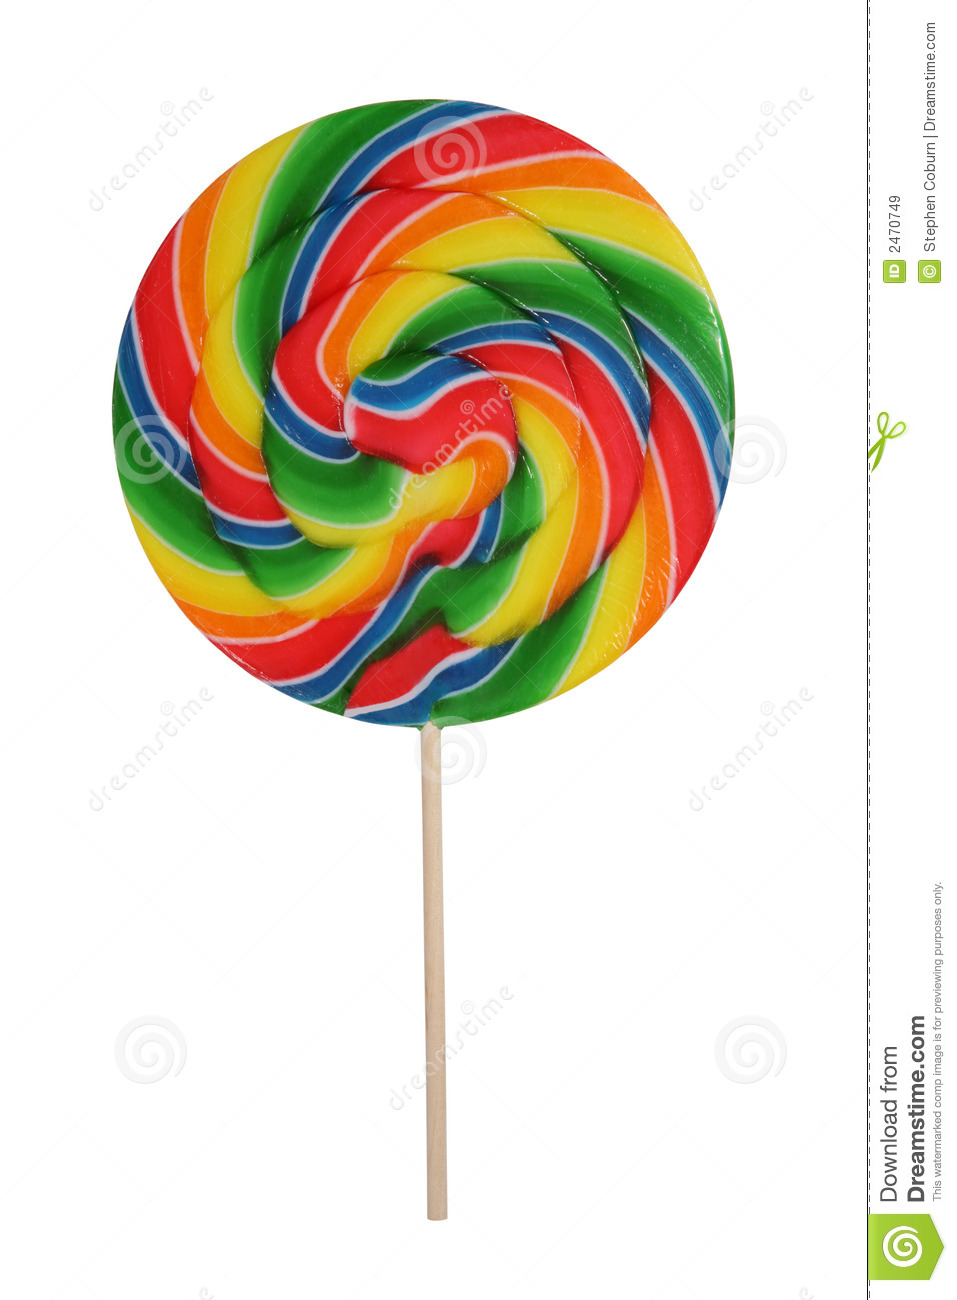 Candy Lollipop Royalty Free Stock Images   Image  2470749